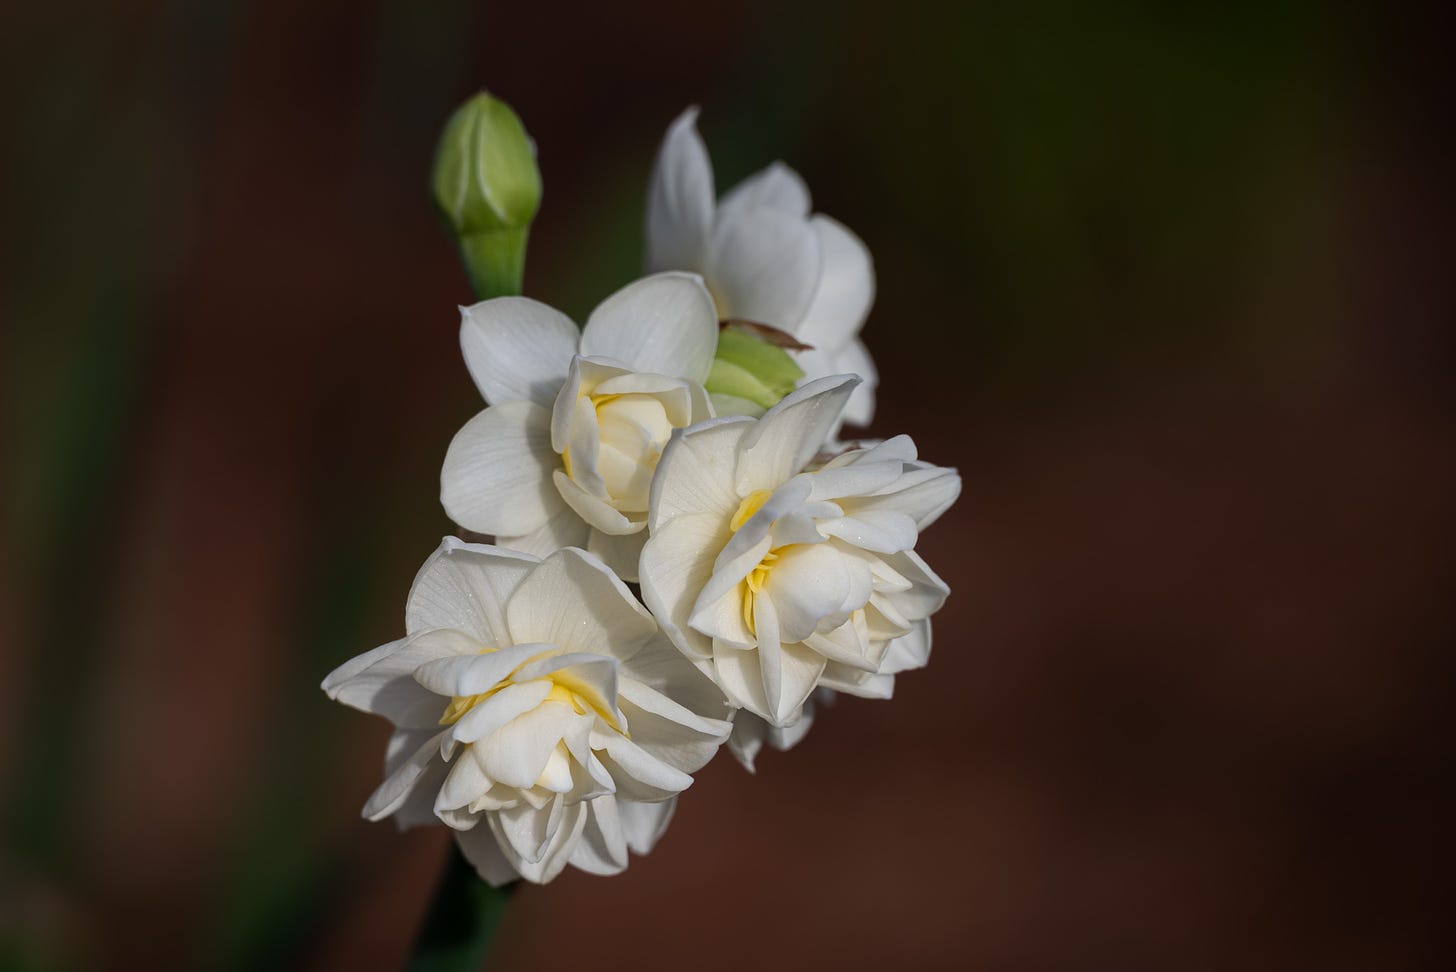 White narcissus blooms against a dark background